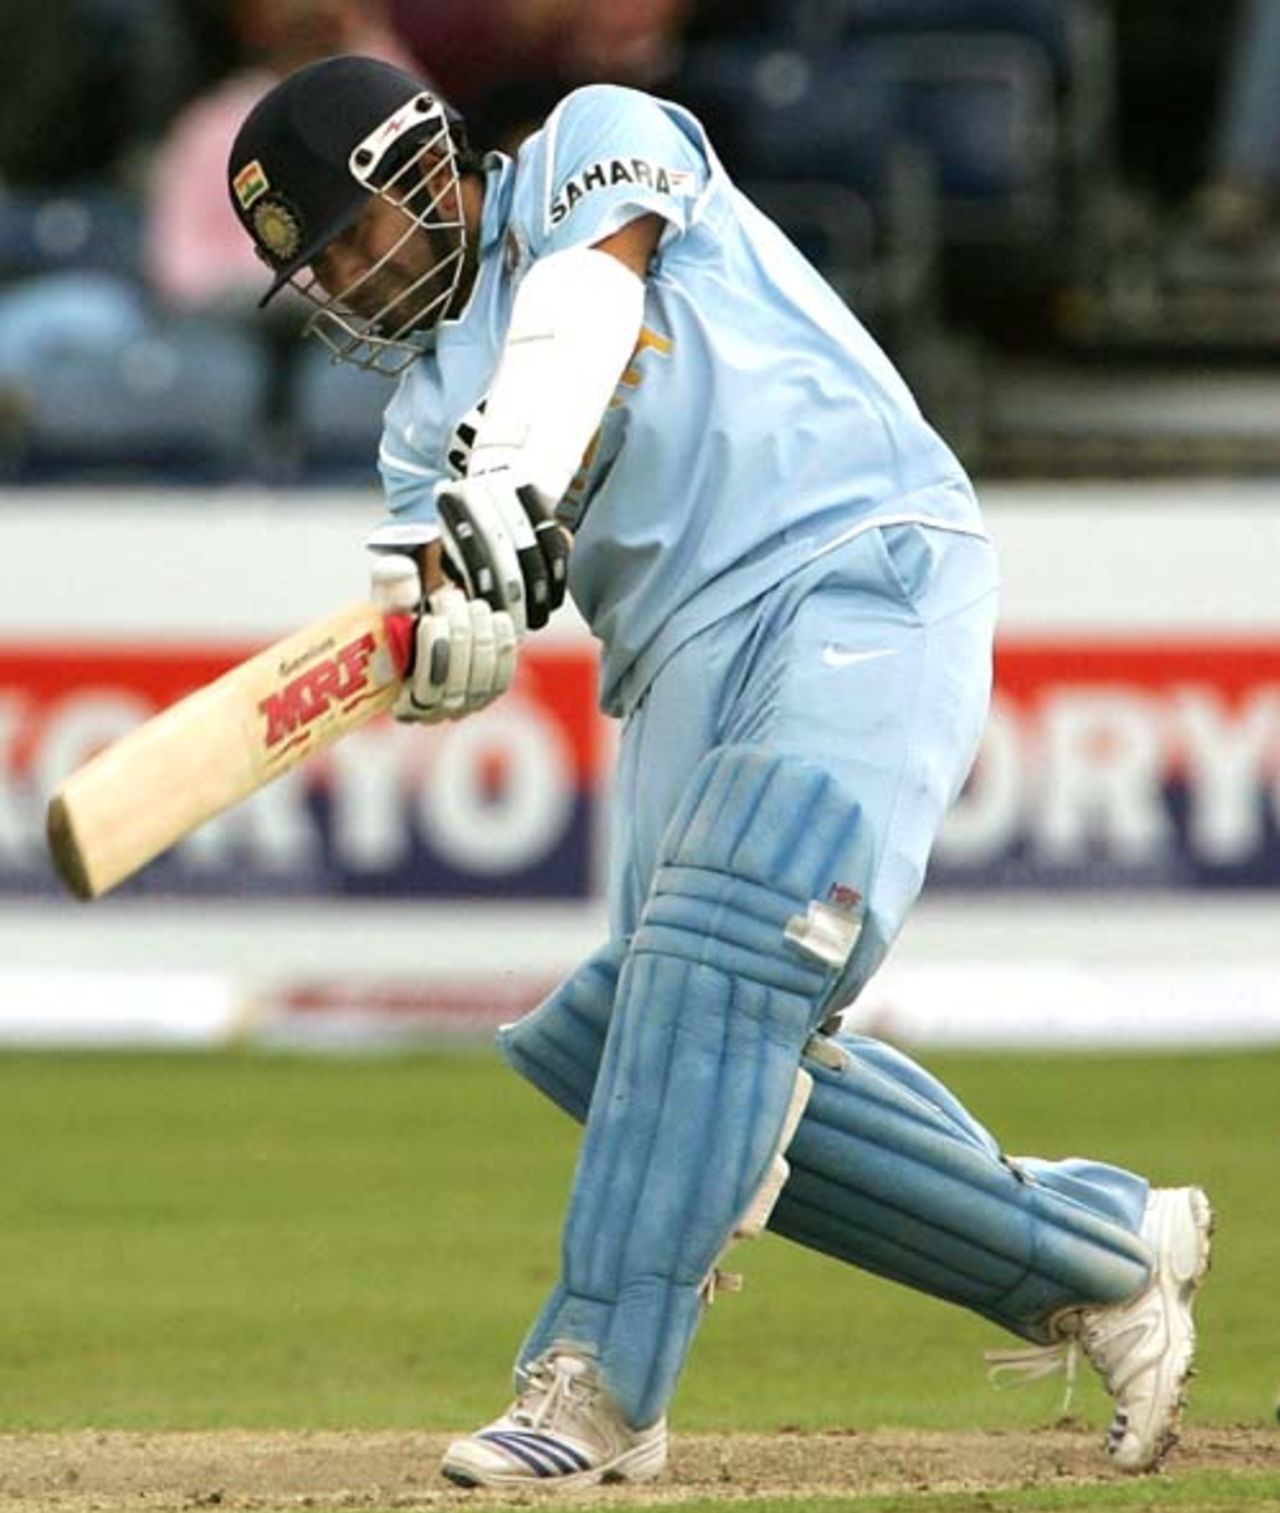 Sachin Tendulkar flicks the ball to the midwicket boundary during his 93-run knock, India v South Africa, 2nd ODI, June 29, 2007